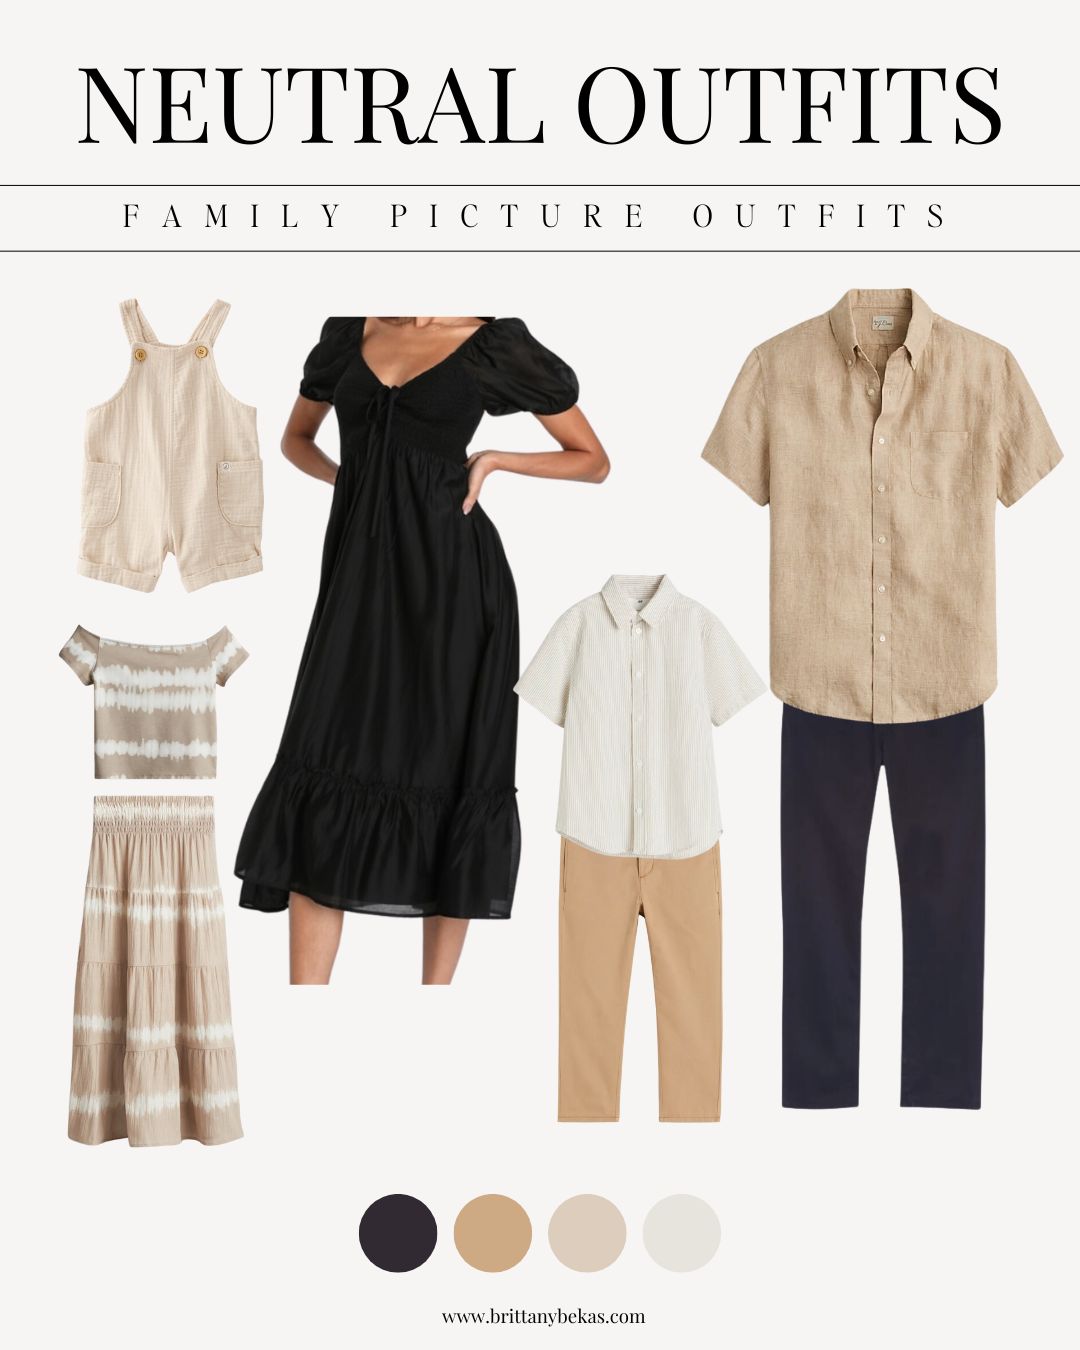 Neutral Summer Family Picture Outfits - Brittany Bekas32